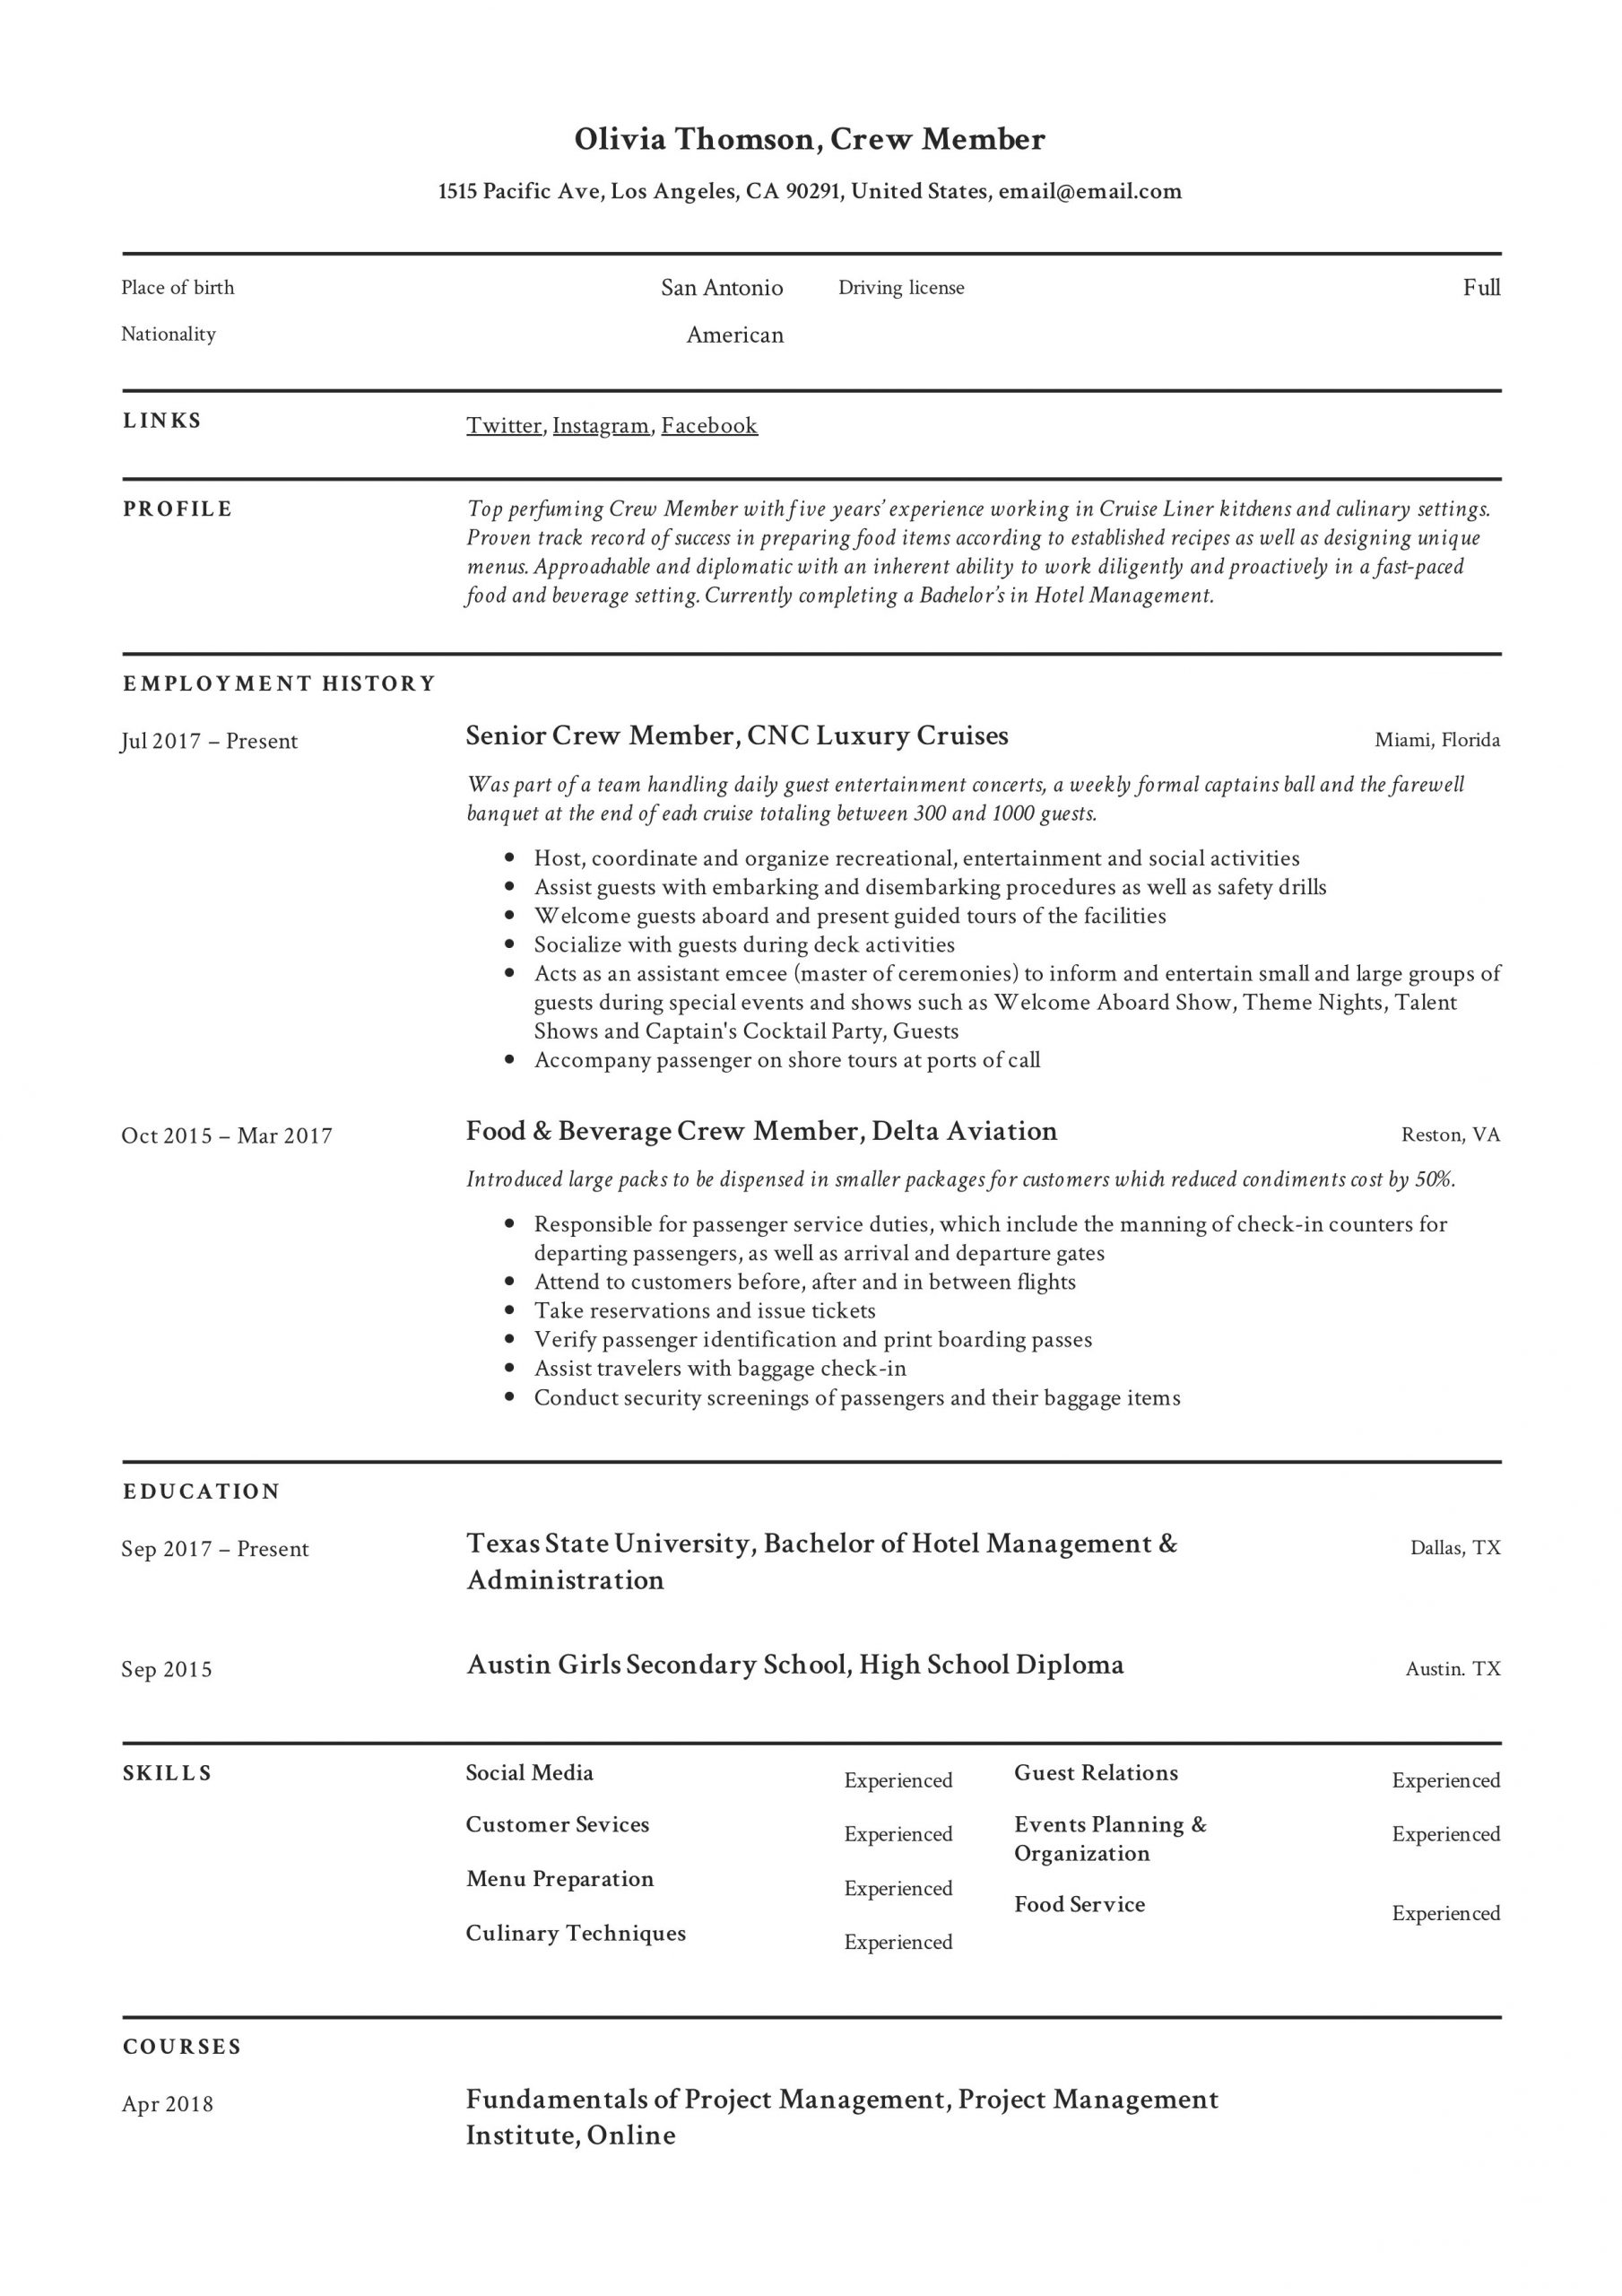 Sample Resume for Service Crew No Experience Crew Member Resume & Writing Guide Download 12 Examples 2020